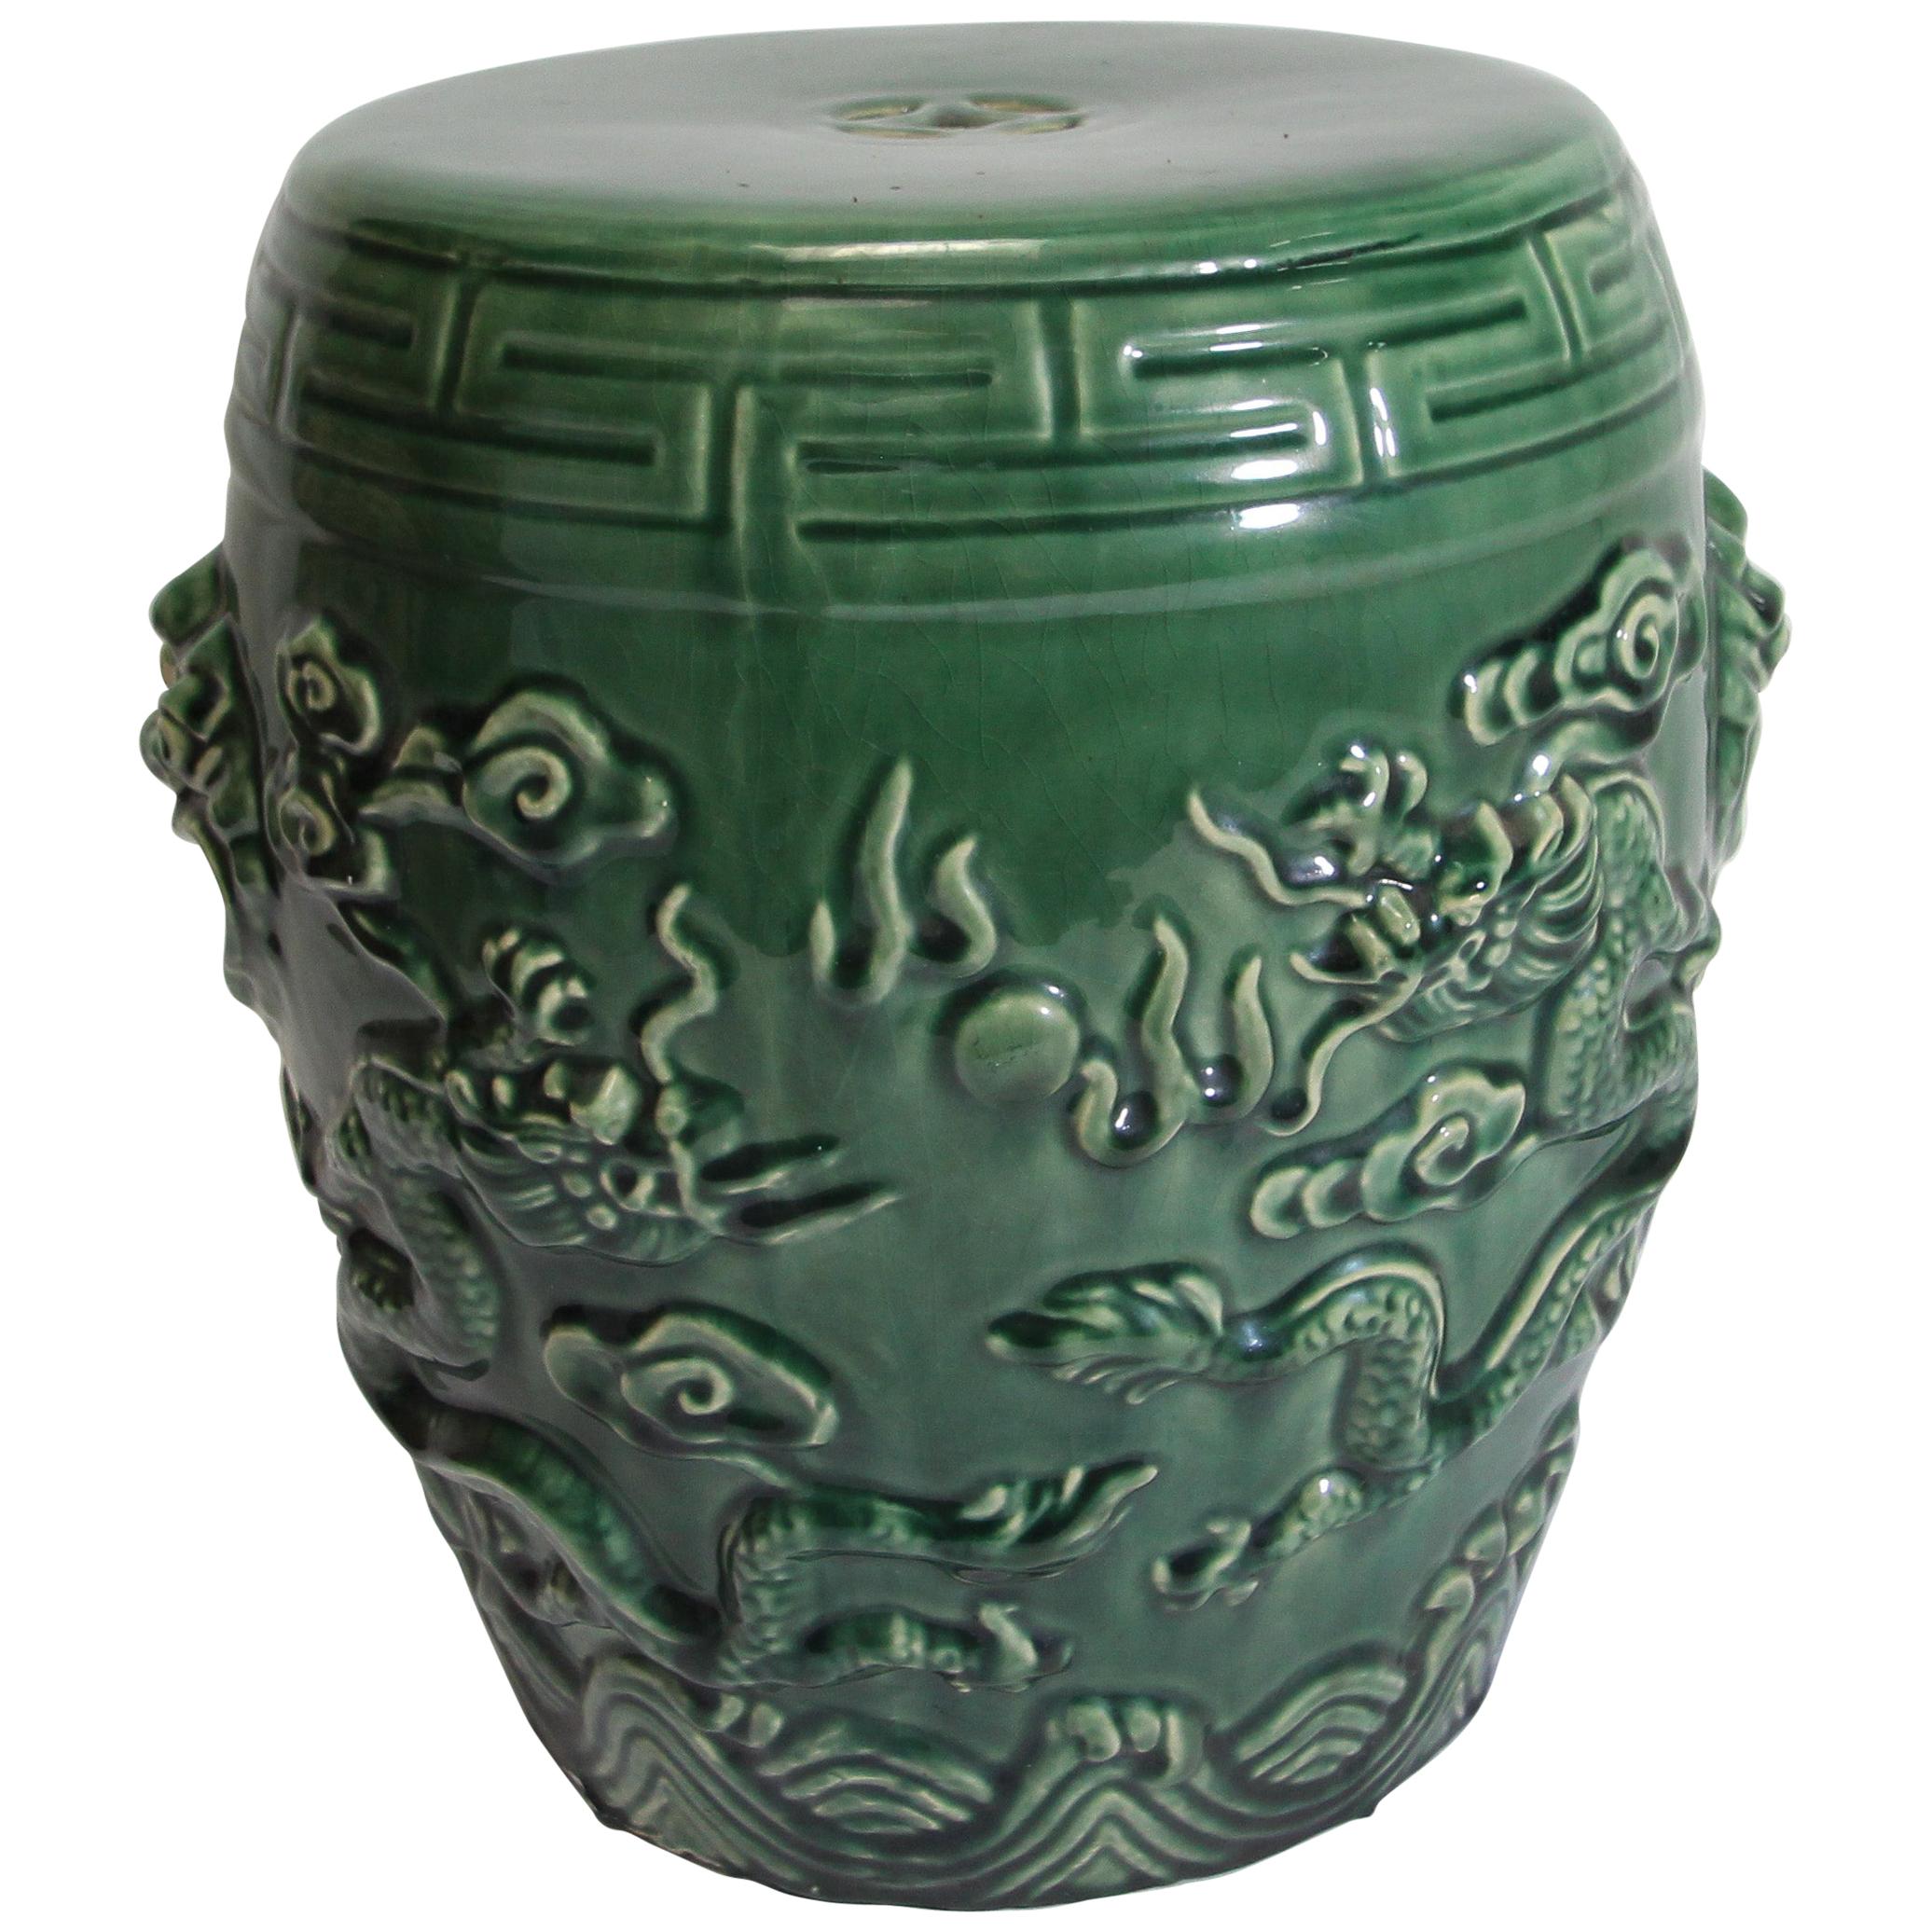 Emerald Green Chinese Ceramic Garden Stool with Dragons